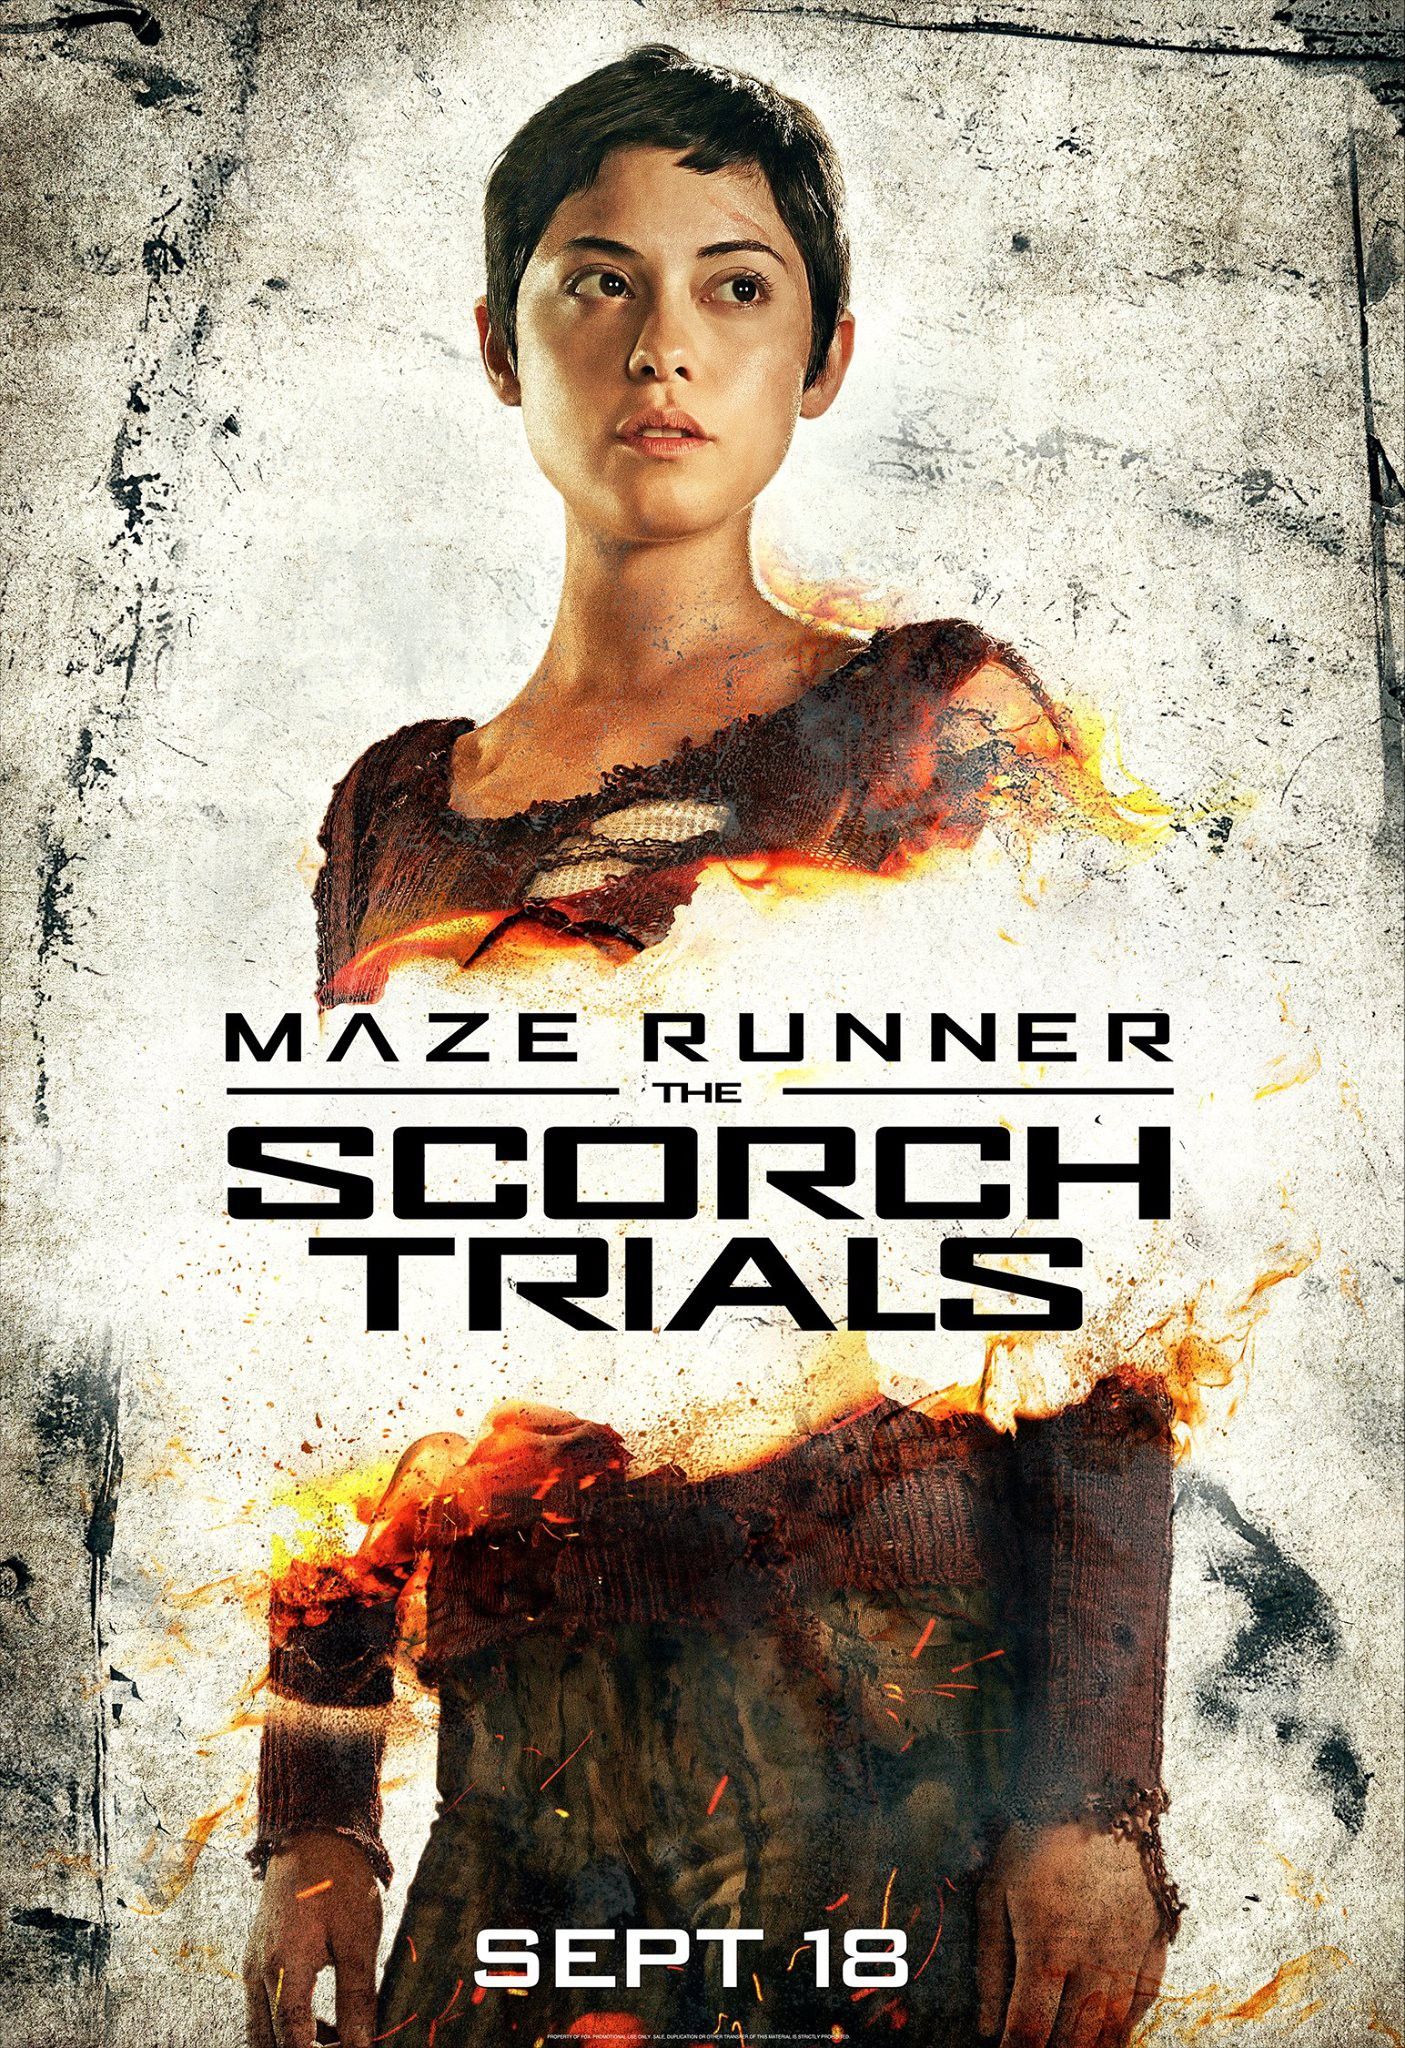 The Maze Runner Scorch Trials Character Poster 2